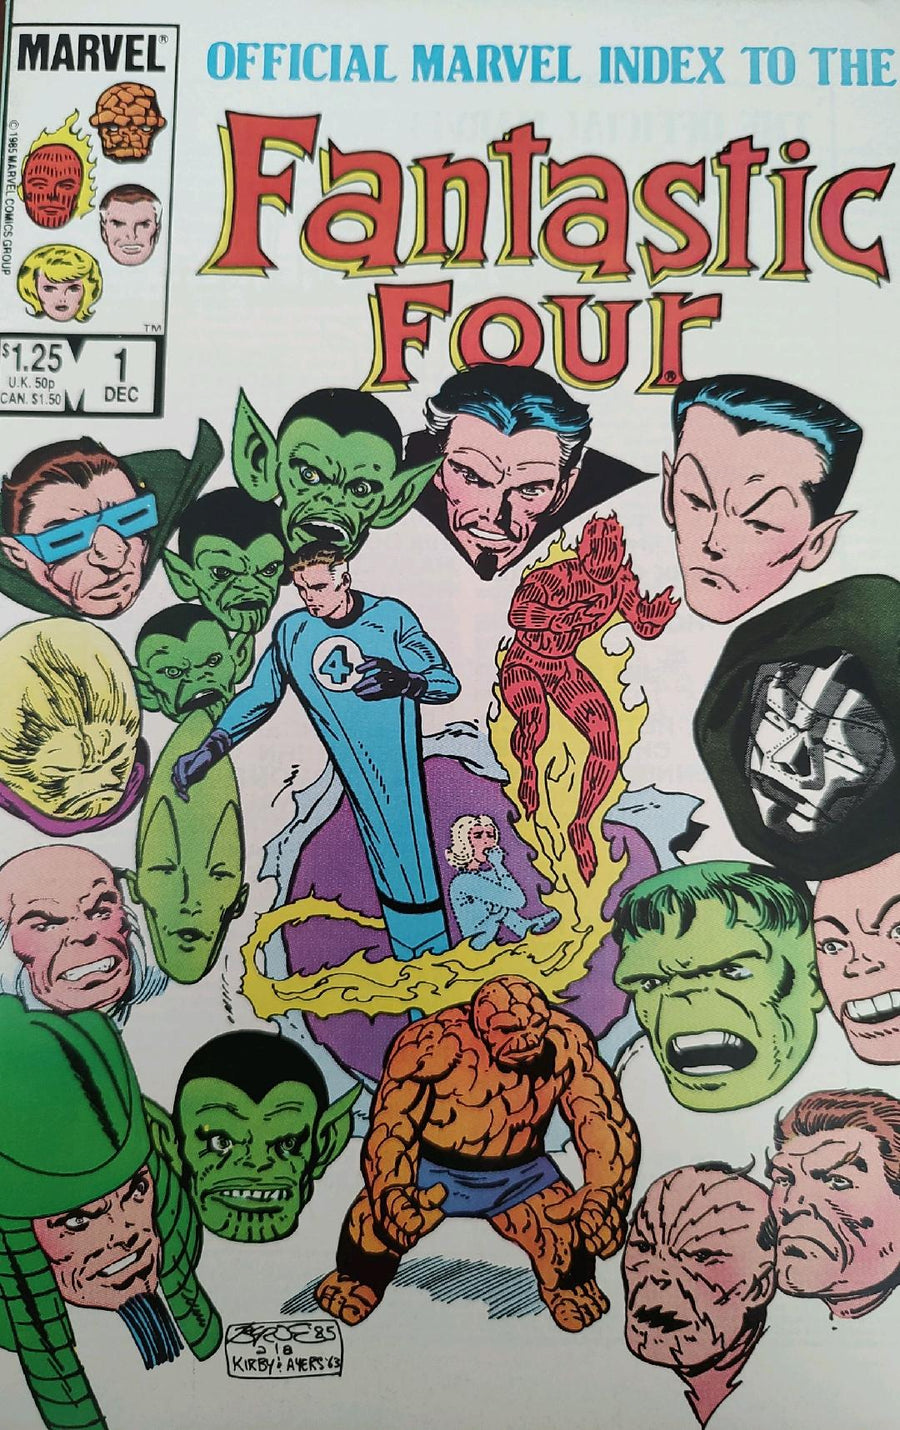 The Official Marvel Index to the Fantastic Four #1 Comic Book Cover